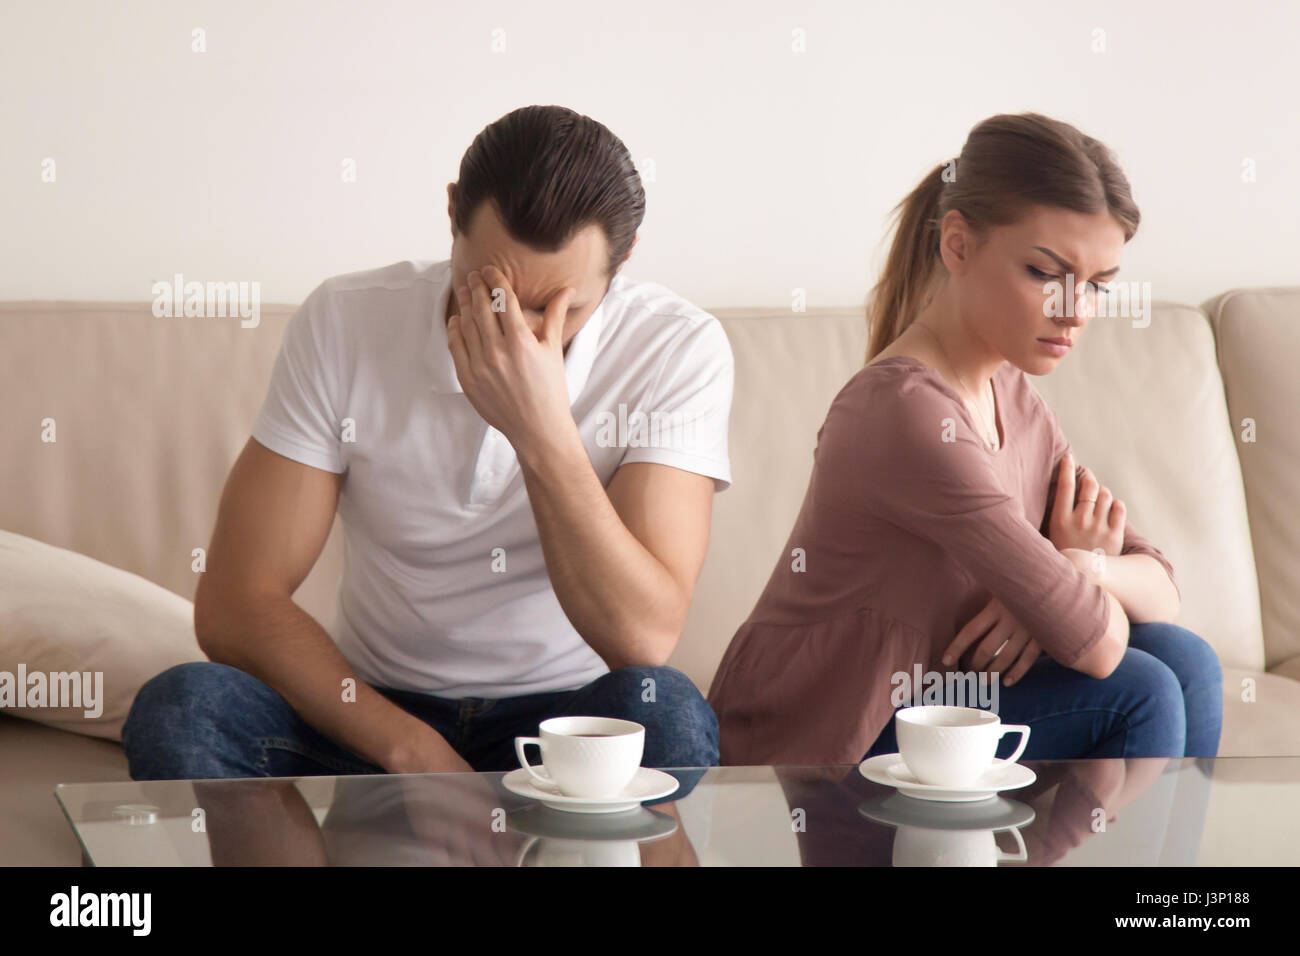 Young couple after arguing, guy tired of quarrelling, woman offe Stock Photo